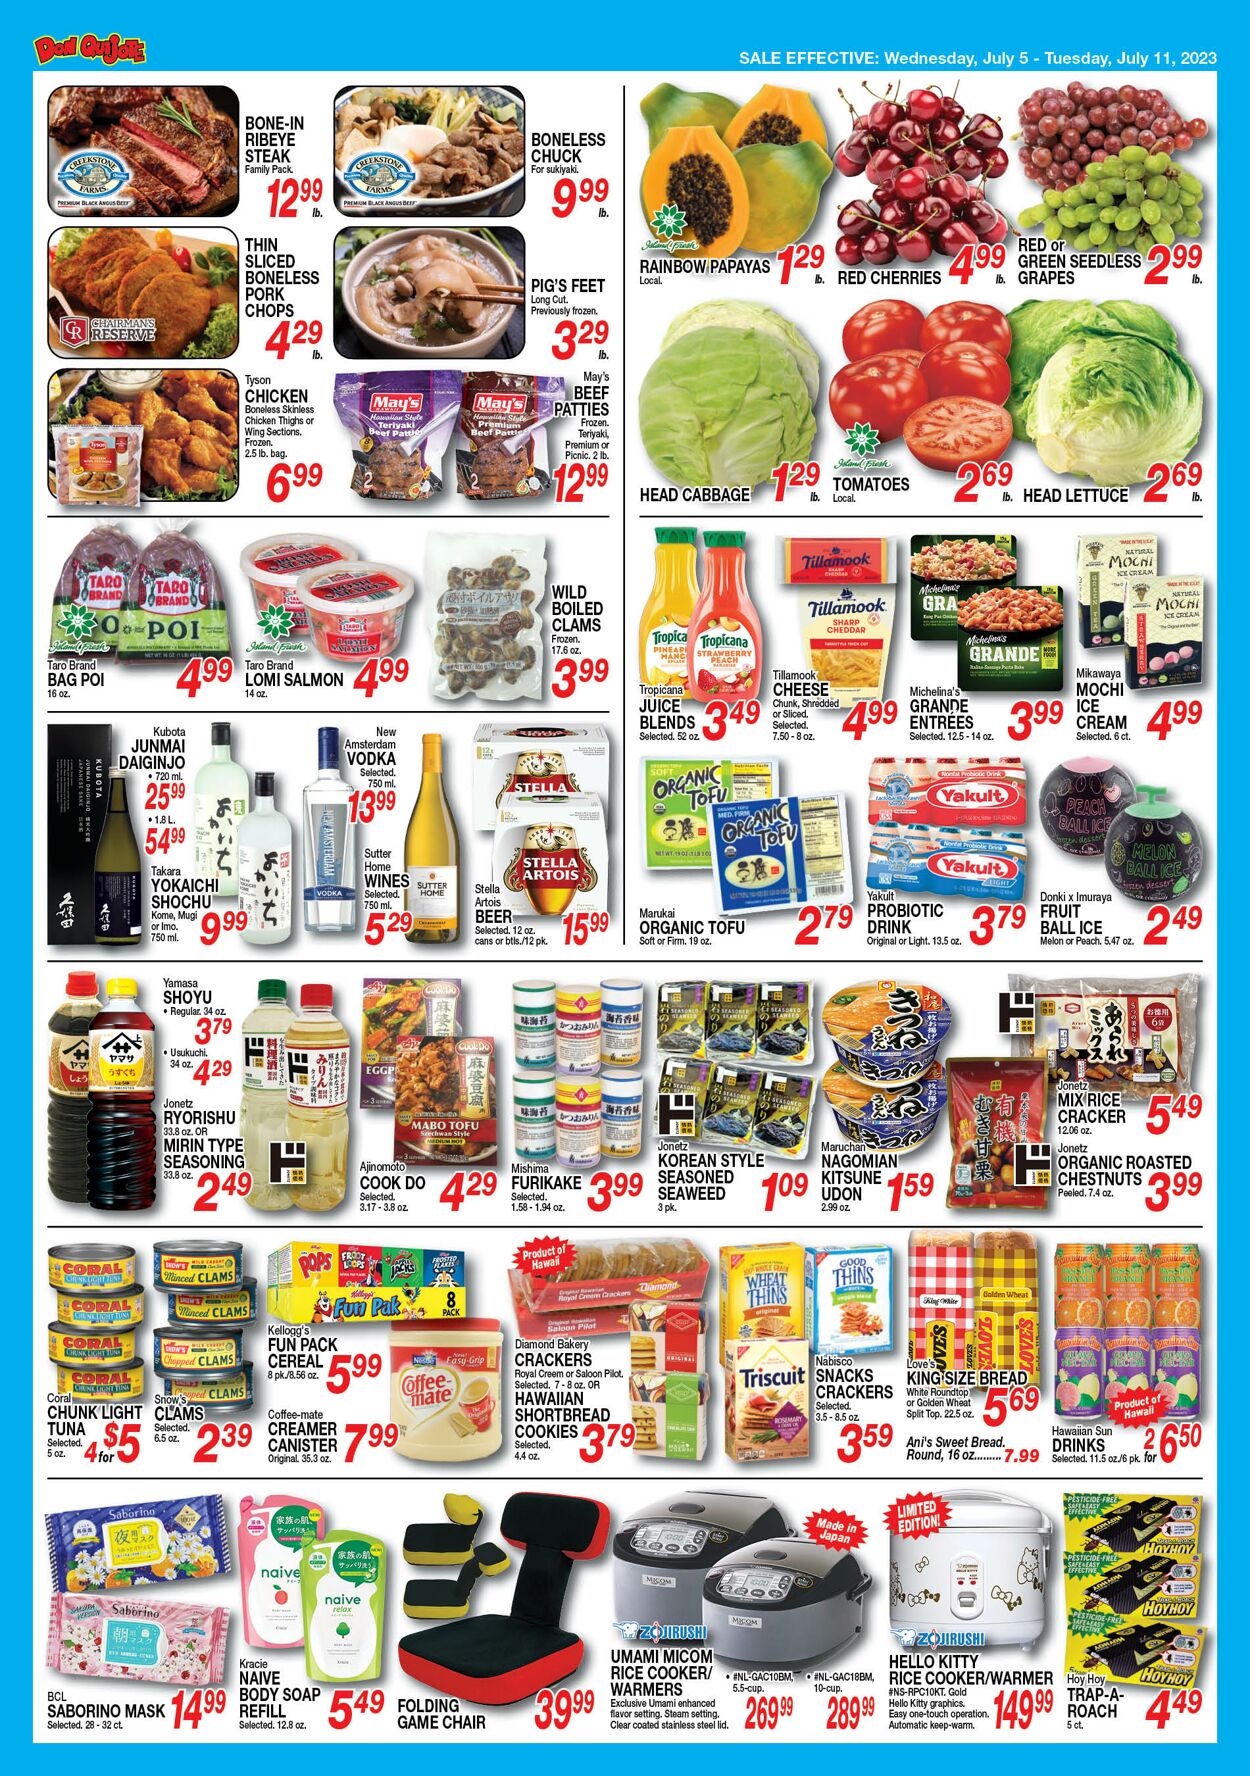 Catalogue Don Quijote Hawaii from 07/05/2023